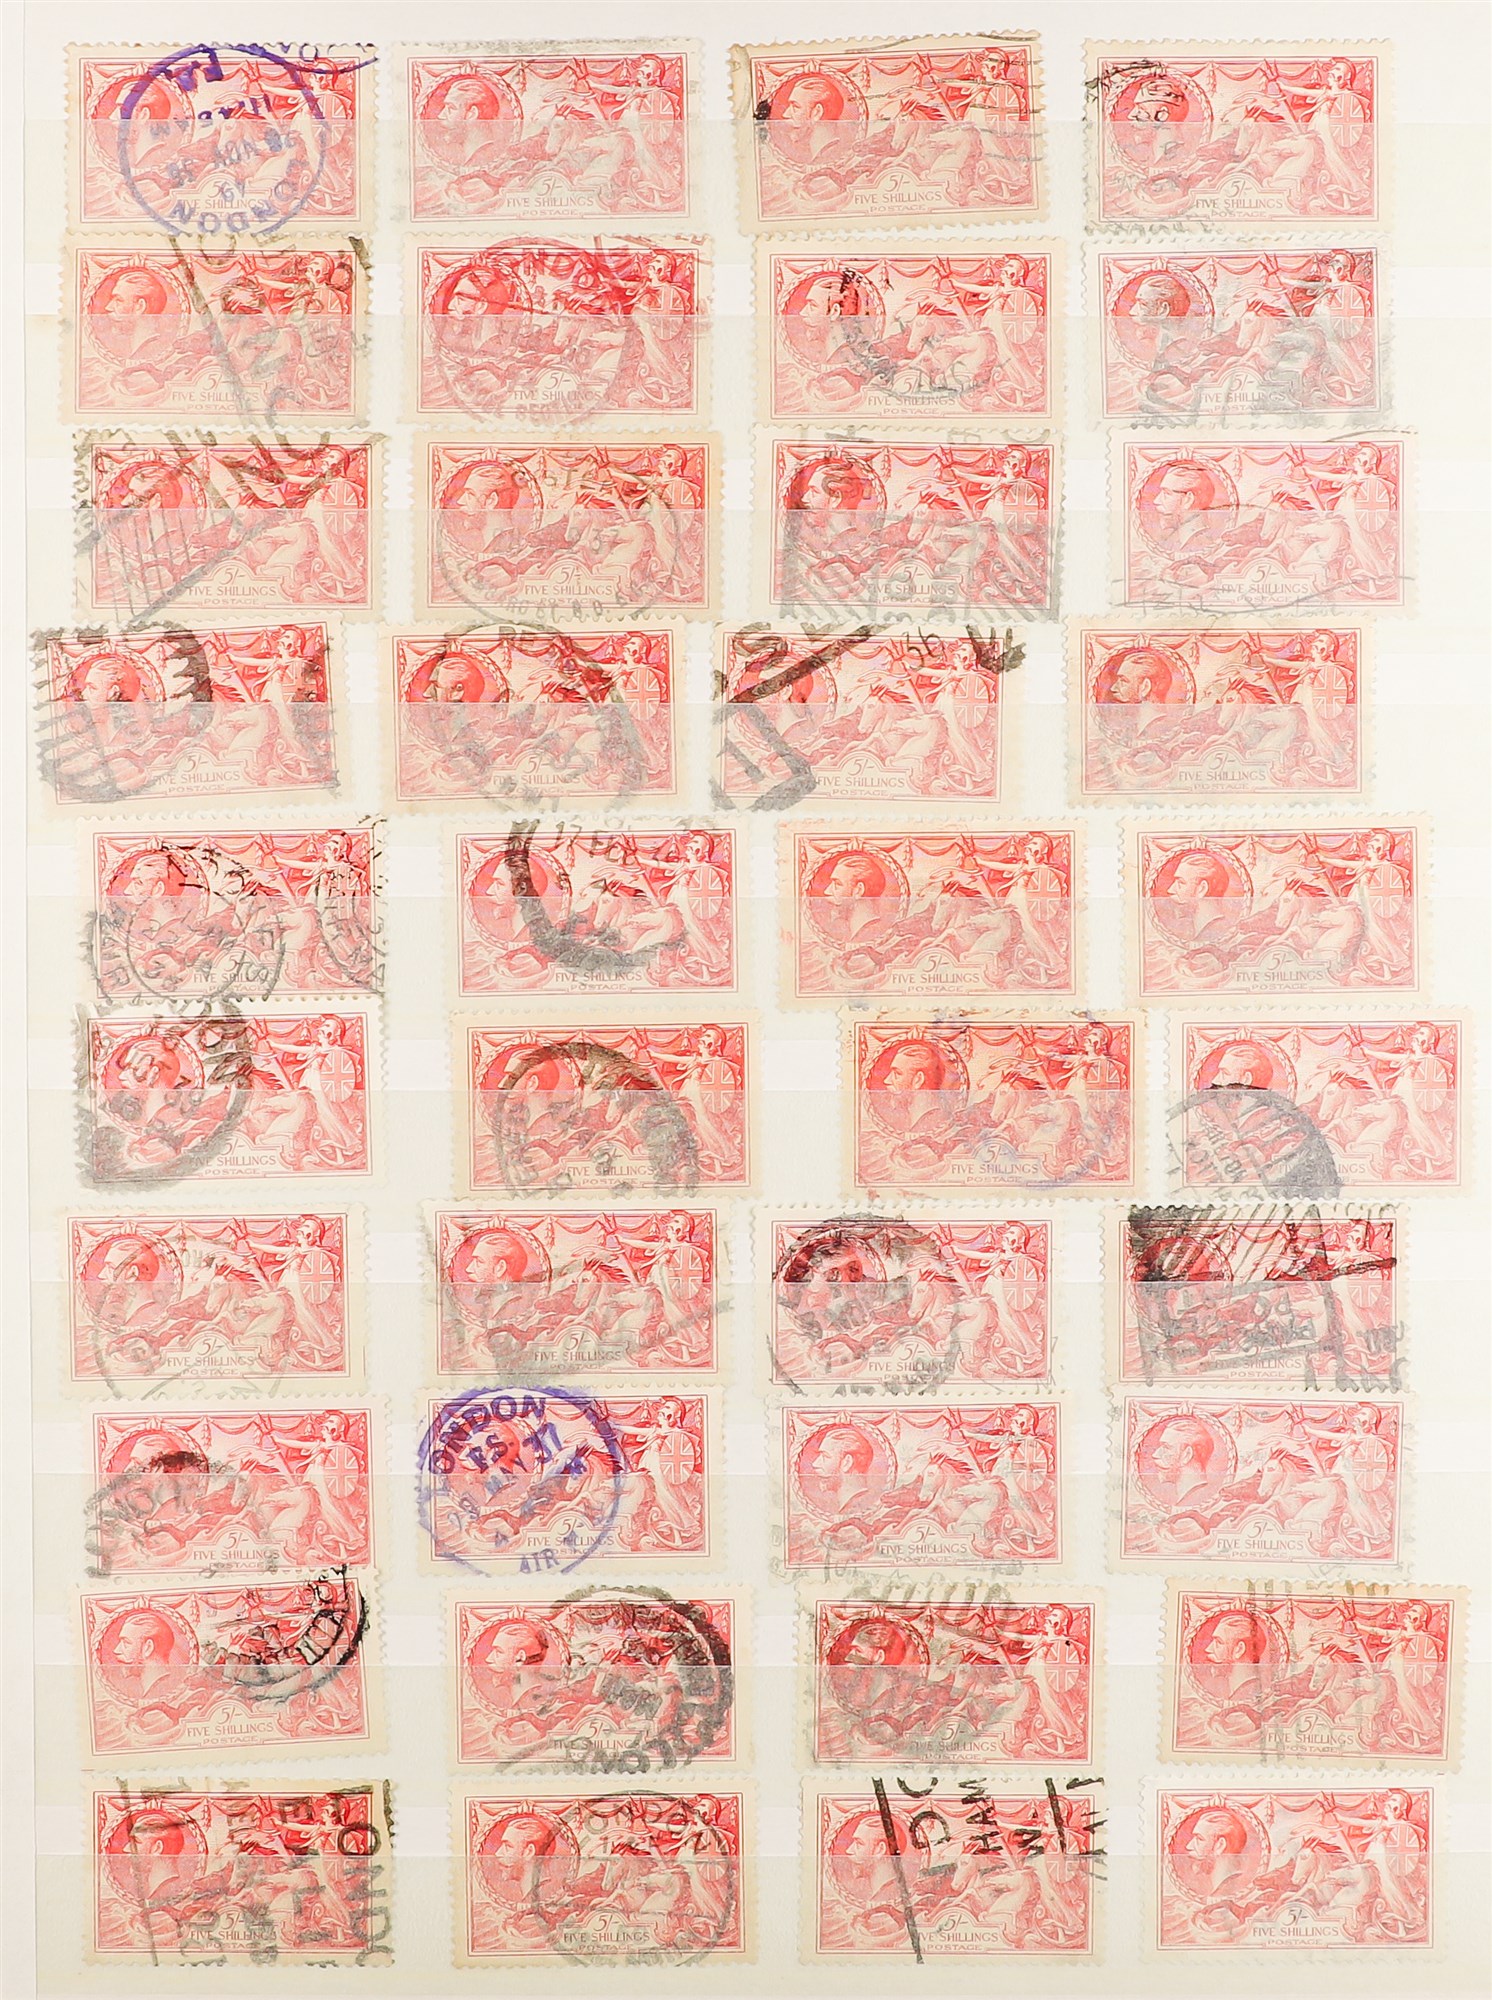 GB.GEORGE V 1934 RE-ENGRAVED SEAHORSES approx 600 used examples - 2s6d browns (440+), 5s rose- - Image 13 of 16